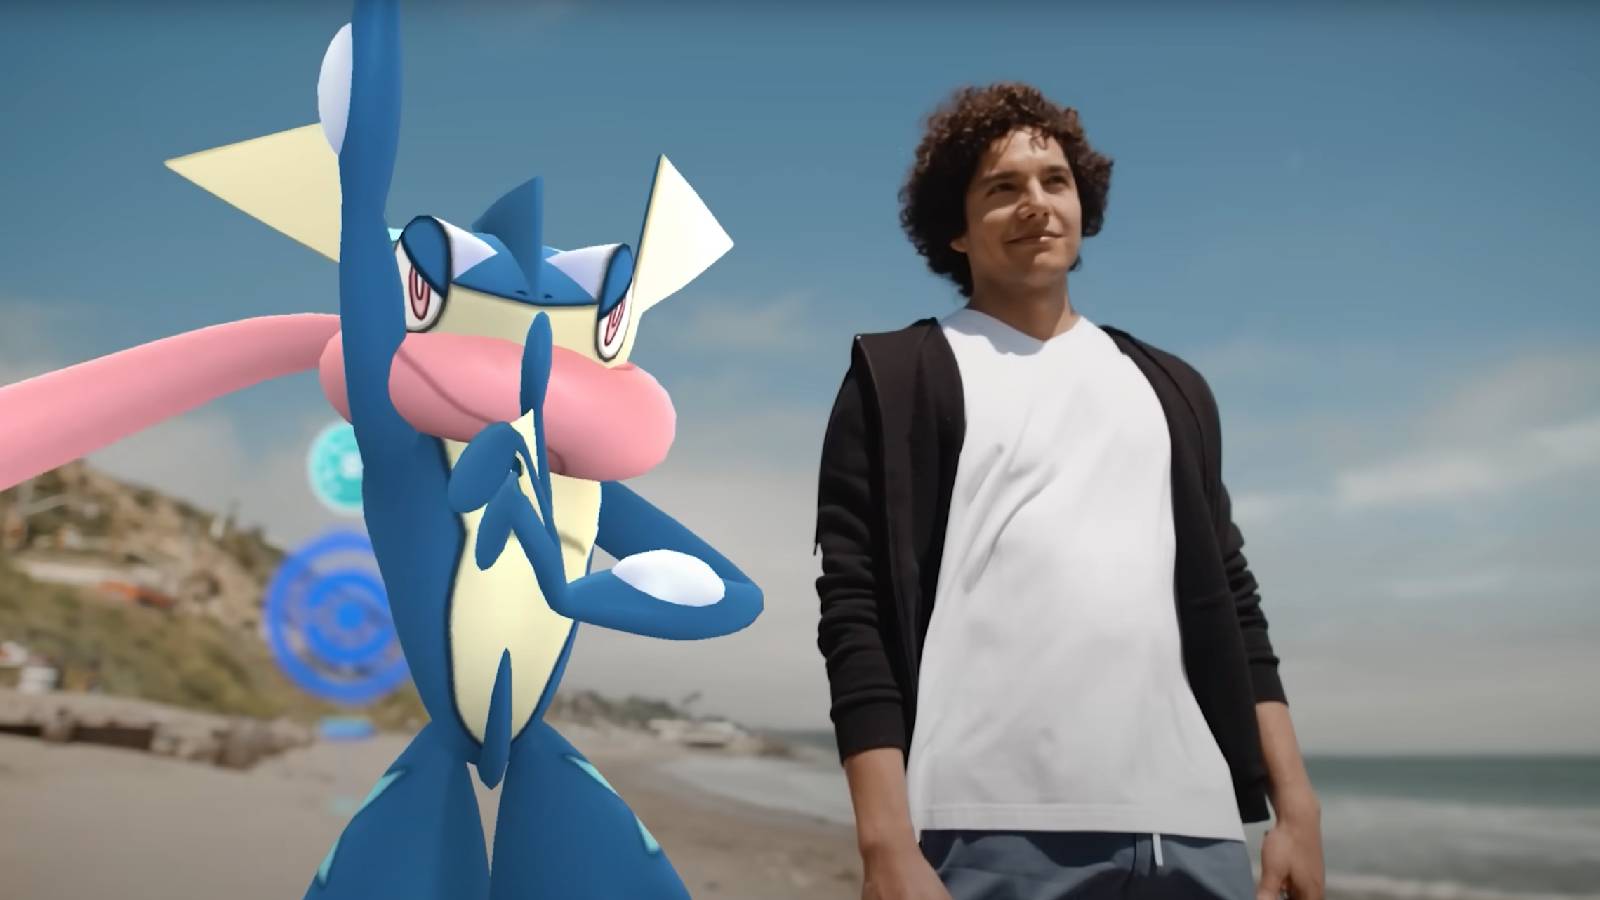 A Pokemon Go player stands next to a 3D model of Greninja